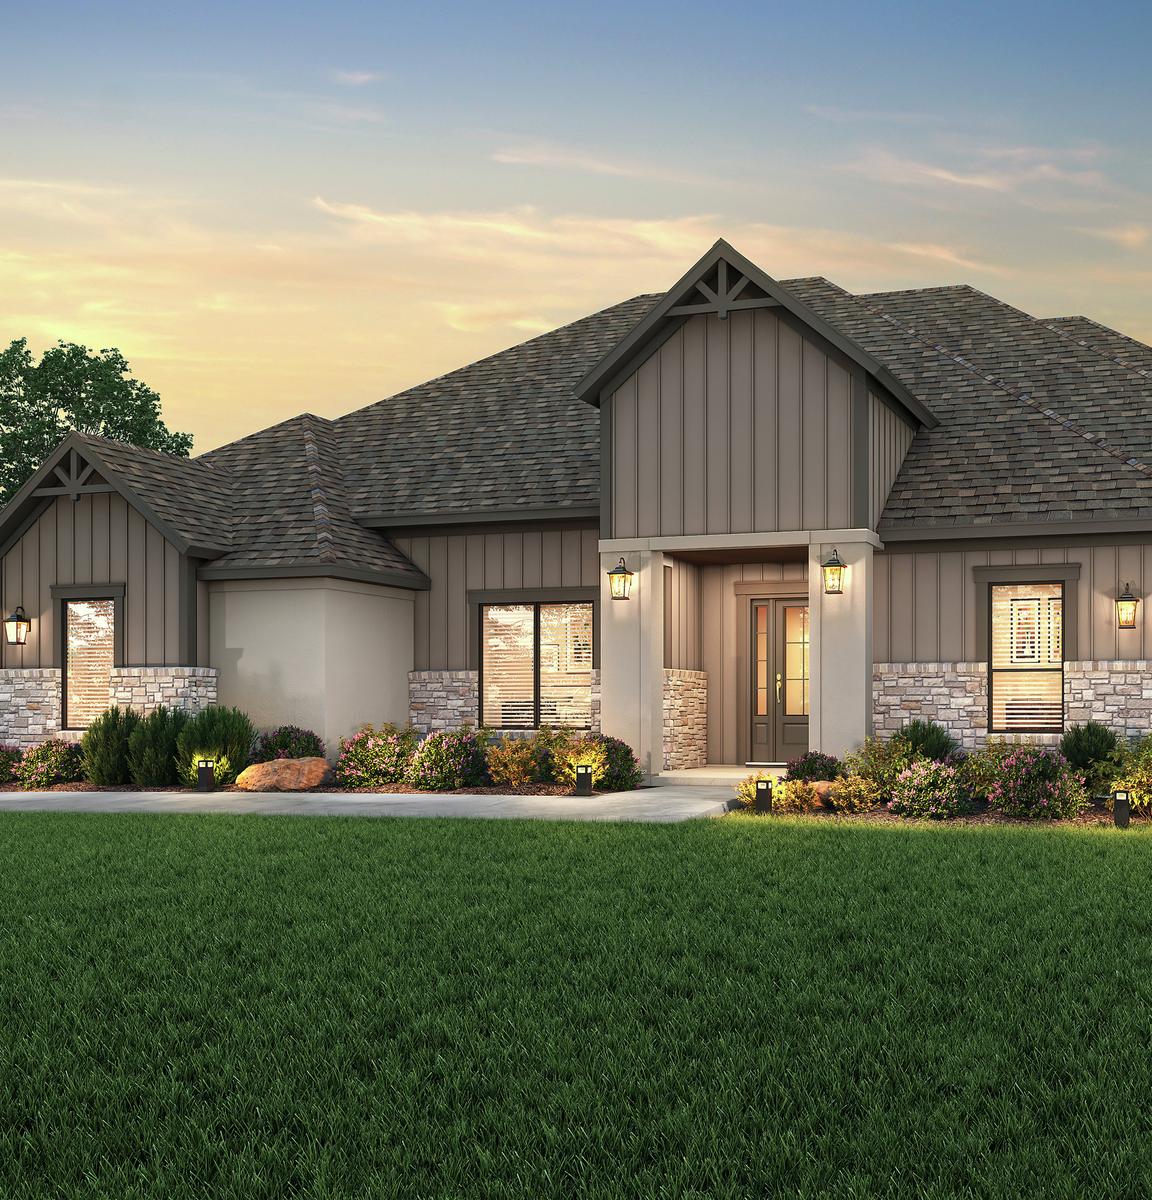 The Timberline dusk rendering with stucco, dark siding and tan stone detailing.